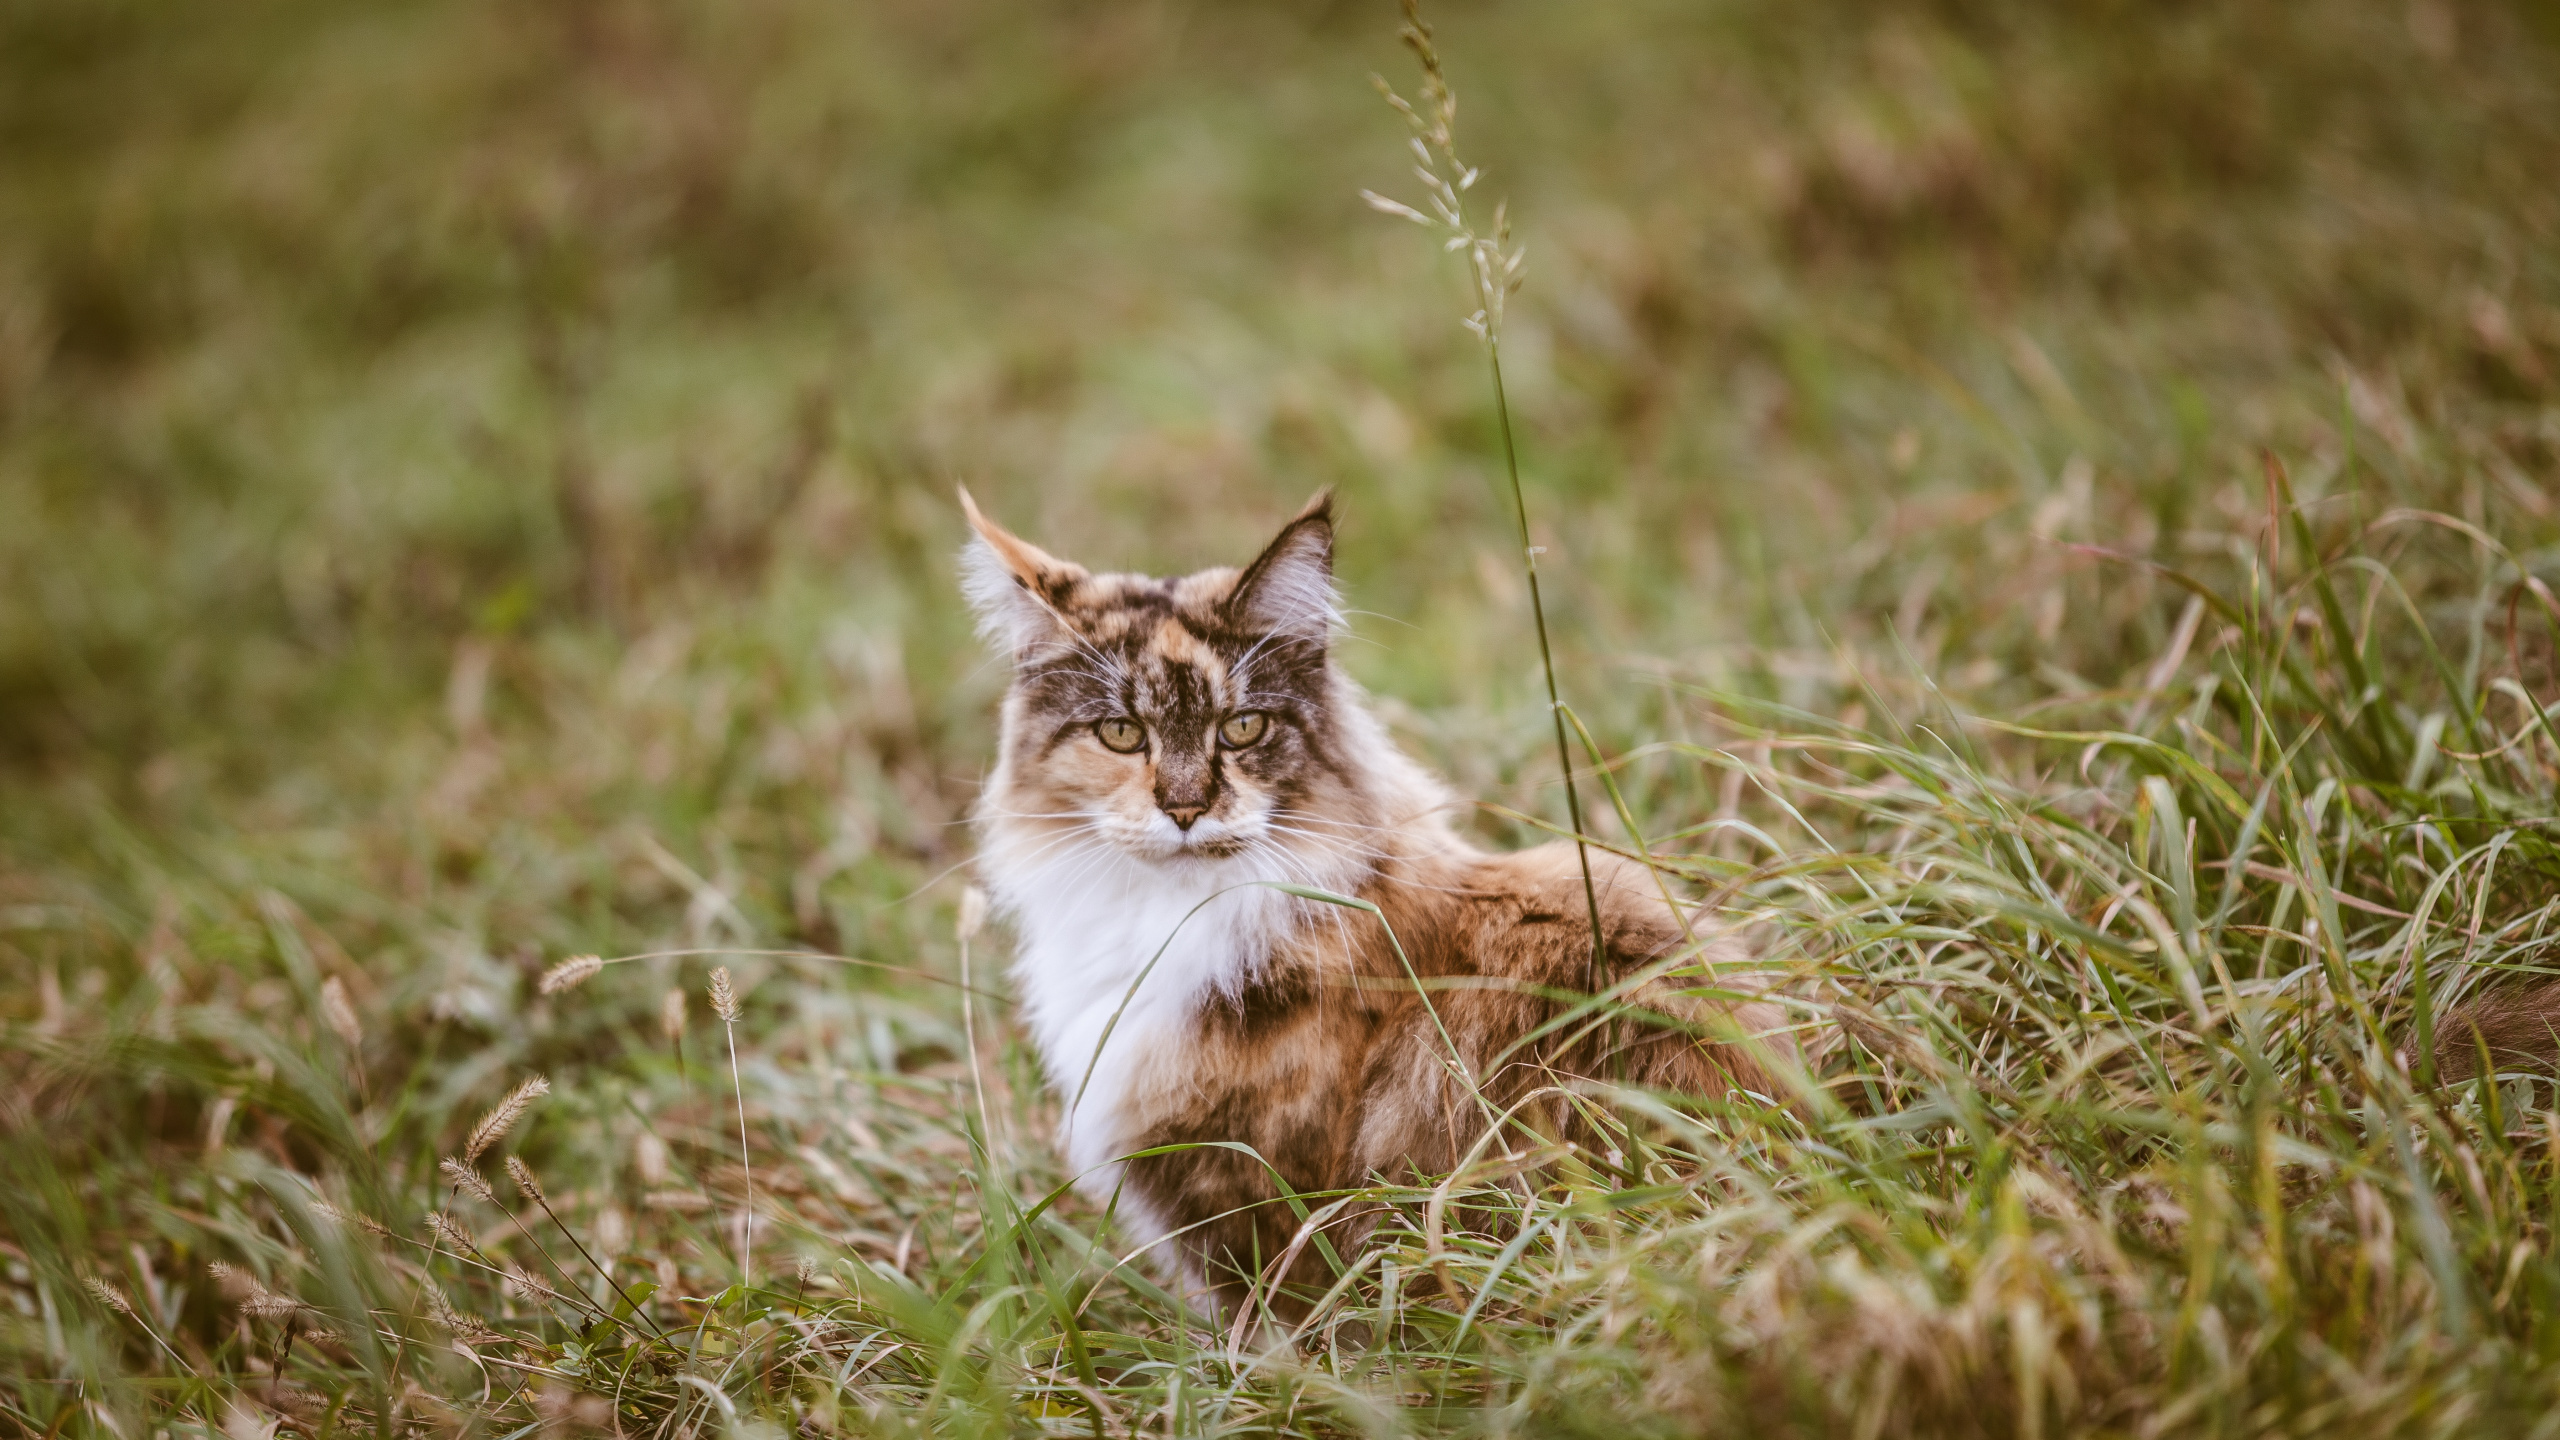 Brown and White Cat on Green Grass During Daytime. Wallpaper in 2560x1440 Resolution